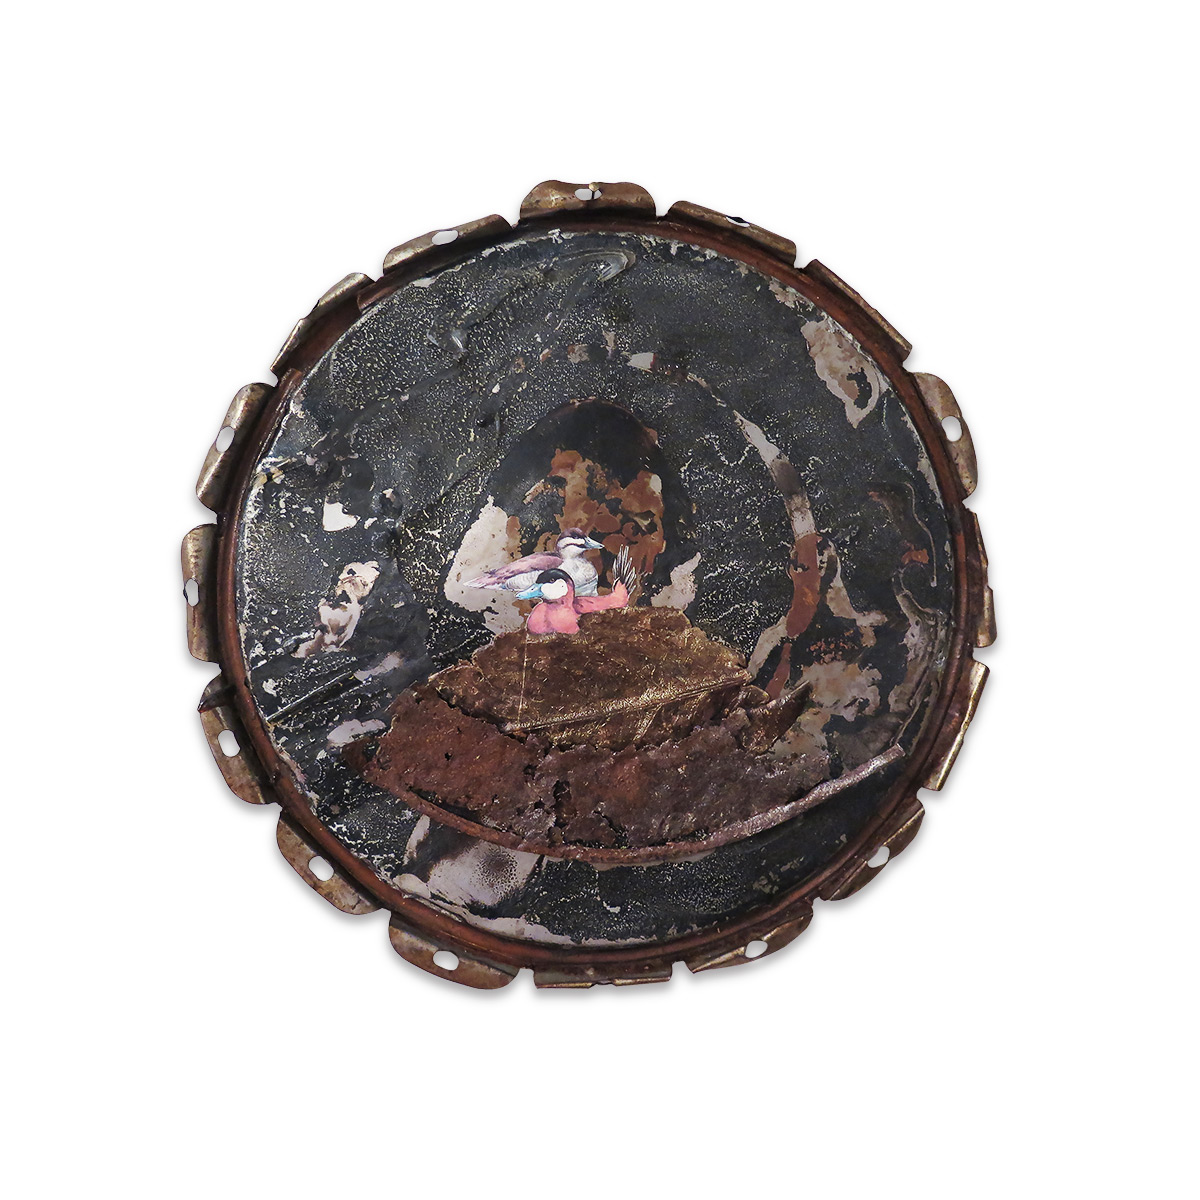  Duckies  (sold)  2016 found objects/mixed media 12.5 diameter 